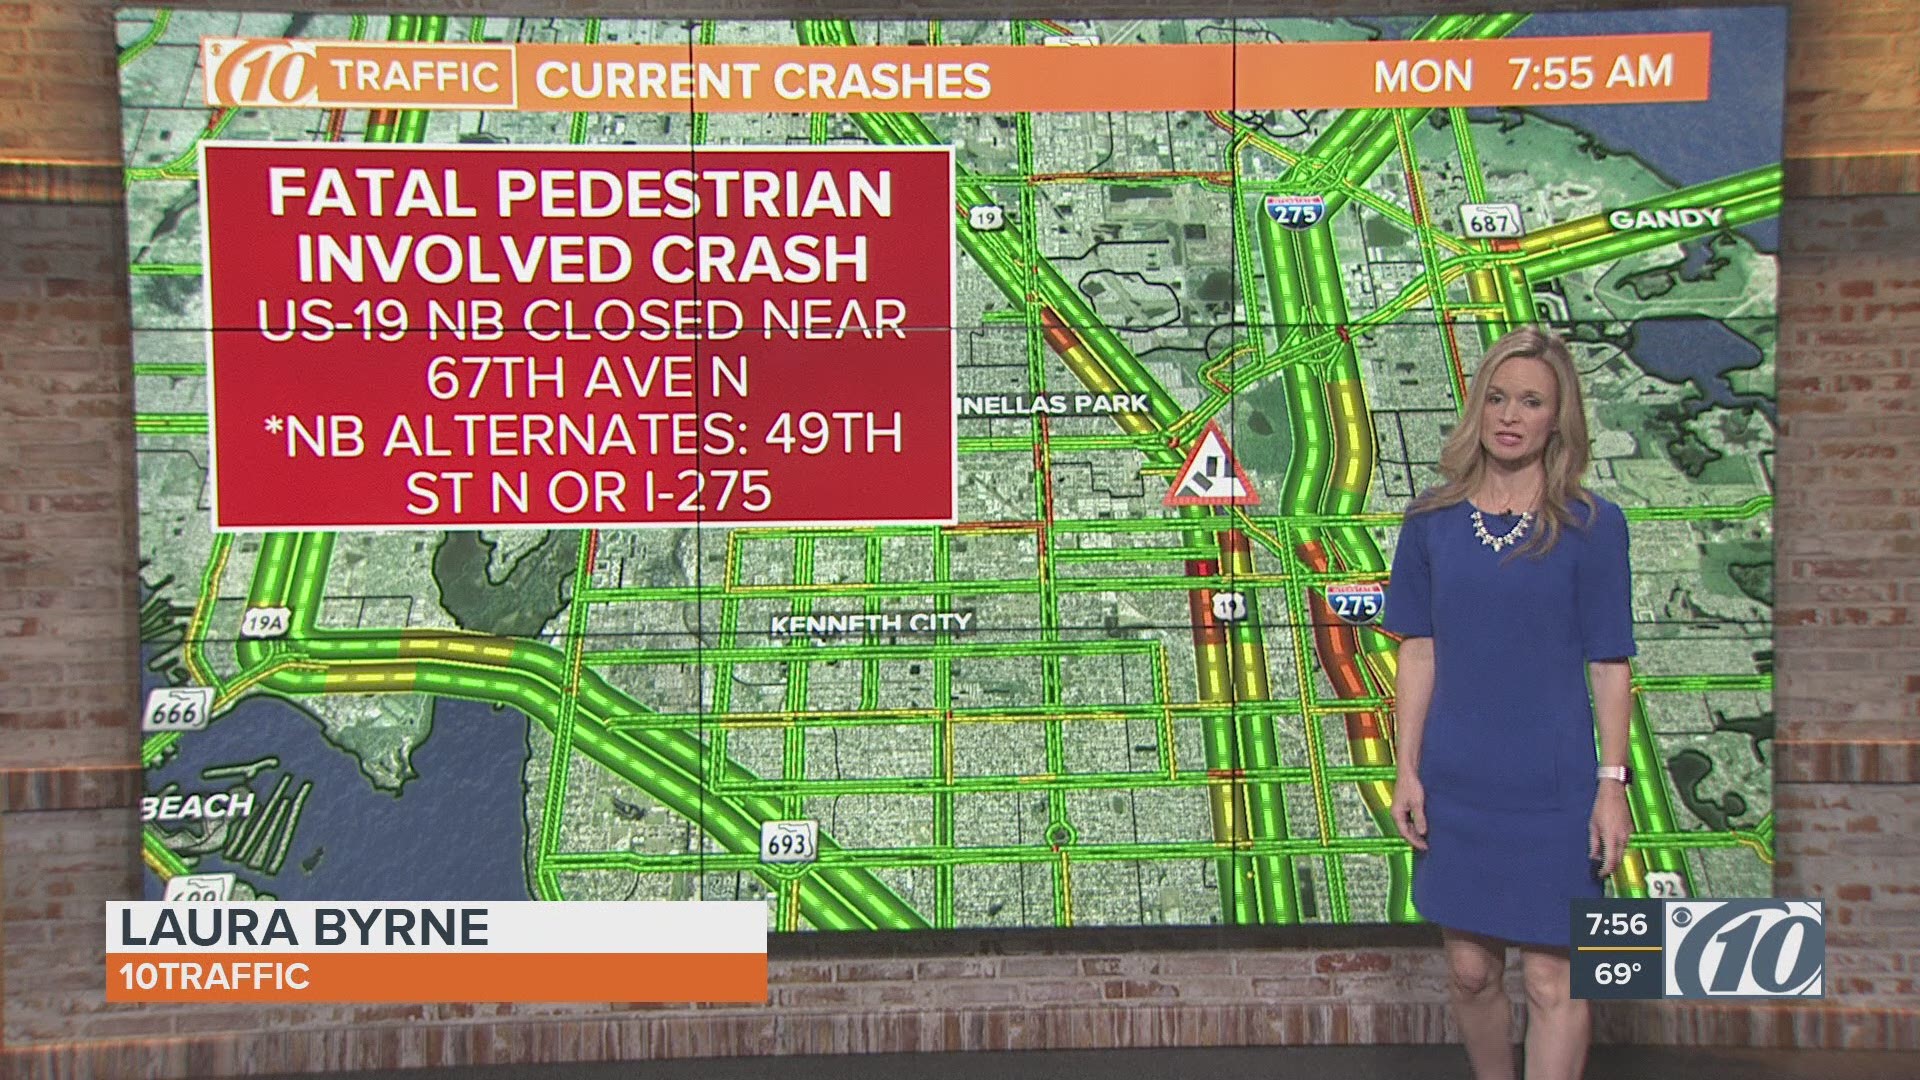 The northbound lanes are closed Monday morning between 64th Avenue and 70th Avenue. https://on.wtsp.com/2TGXmTK